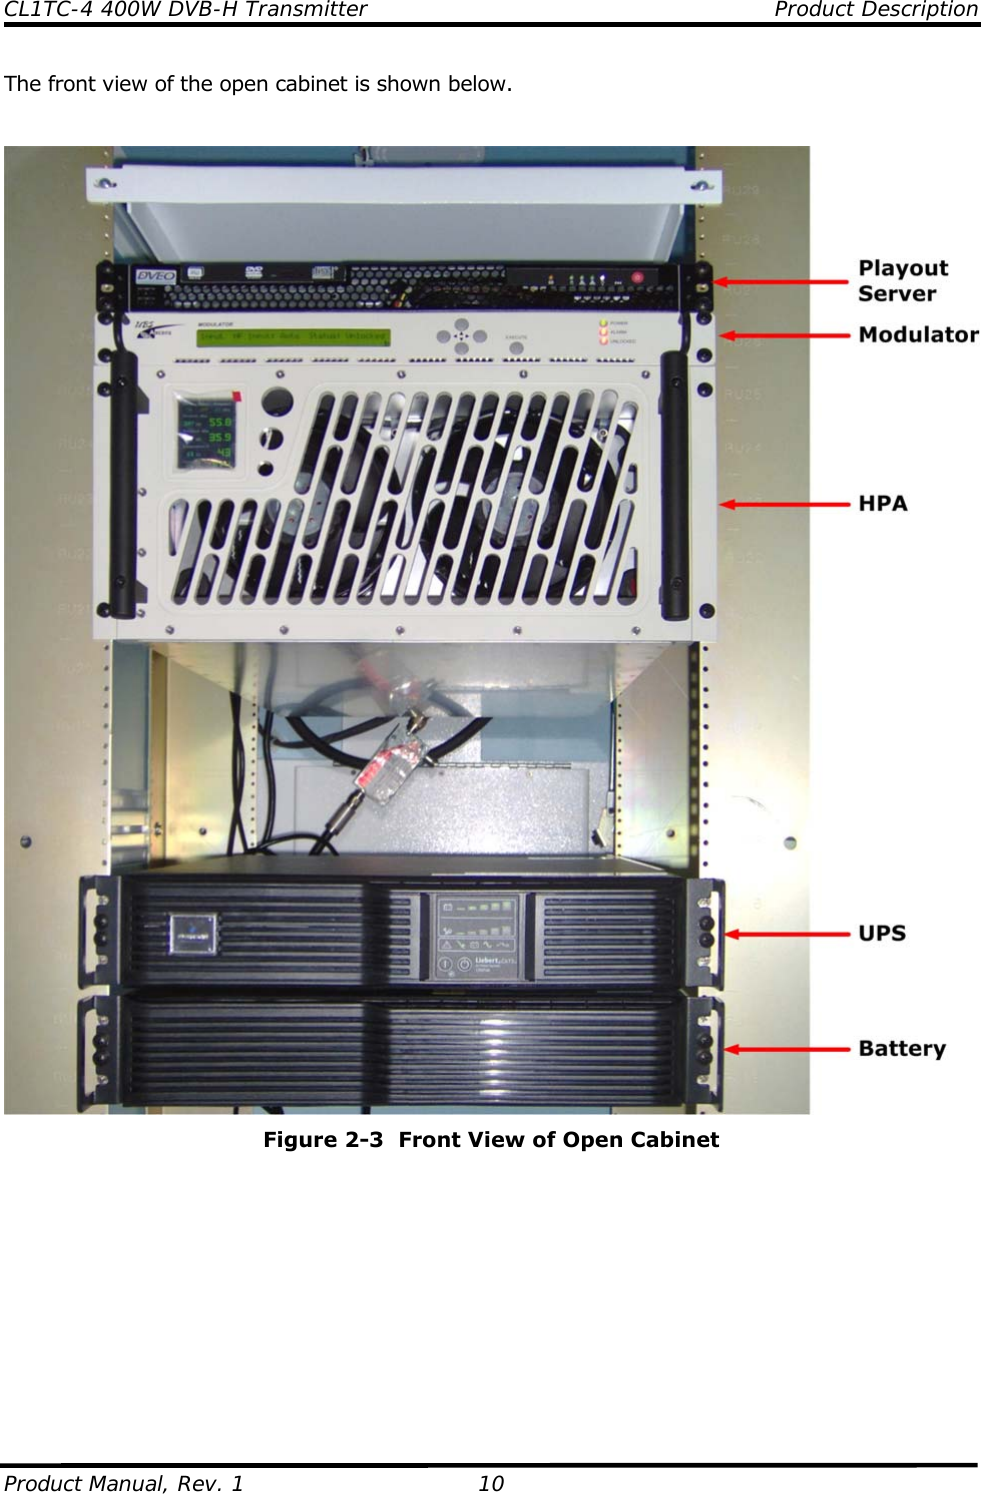 CL1TC-4 400W DVB-H Transmitter    Product Description  Product Manual, Rev. 1  10 The front view of the open cabinet is shown below.    Figure 2-3  Front View of Open Cabinet           